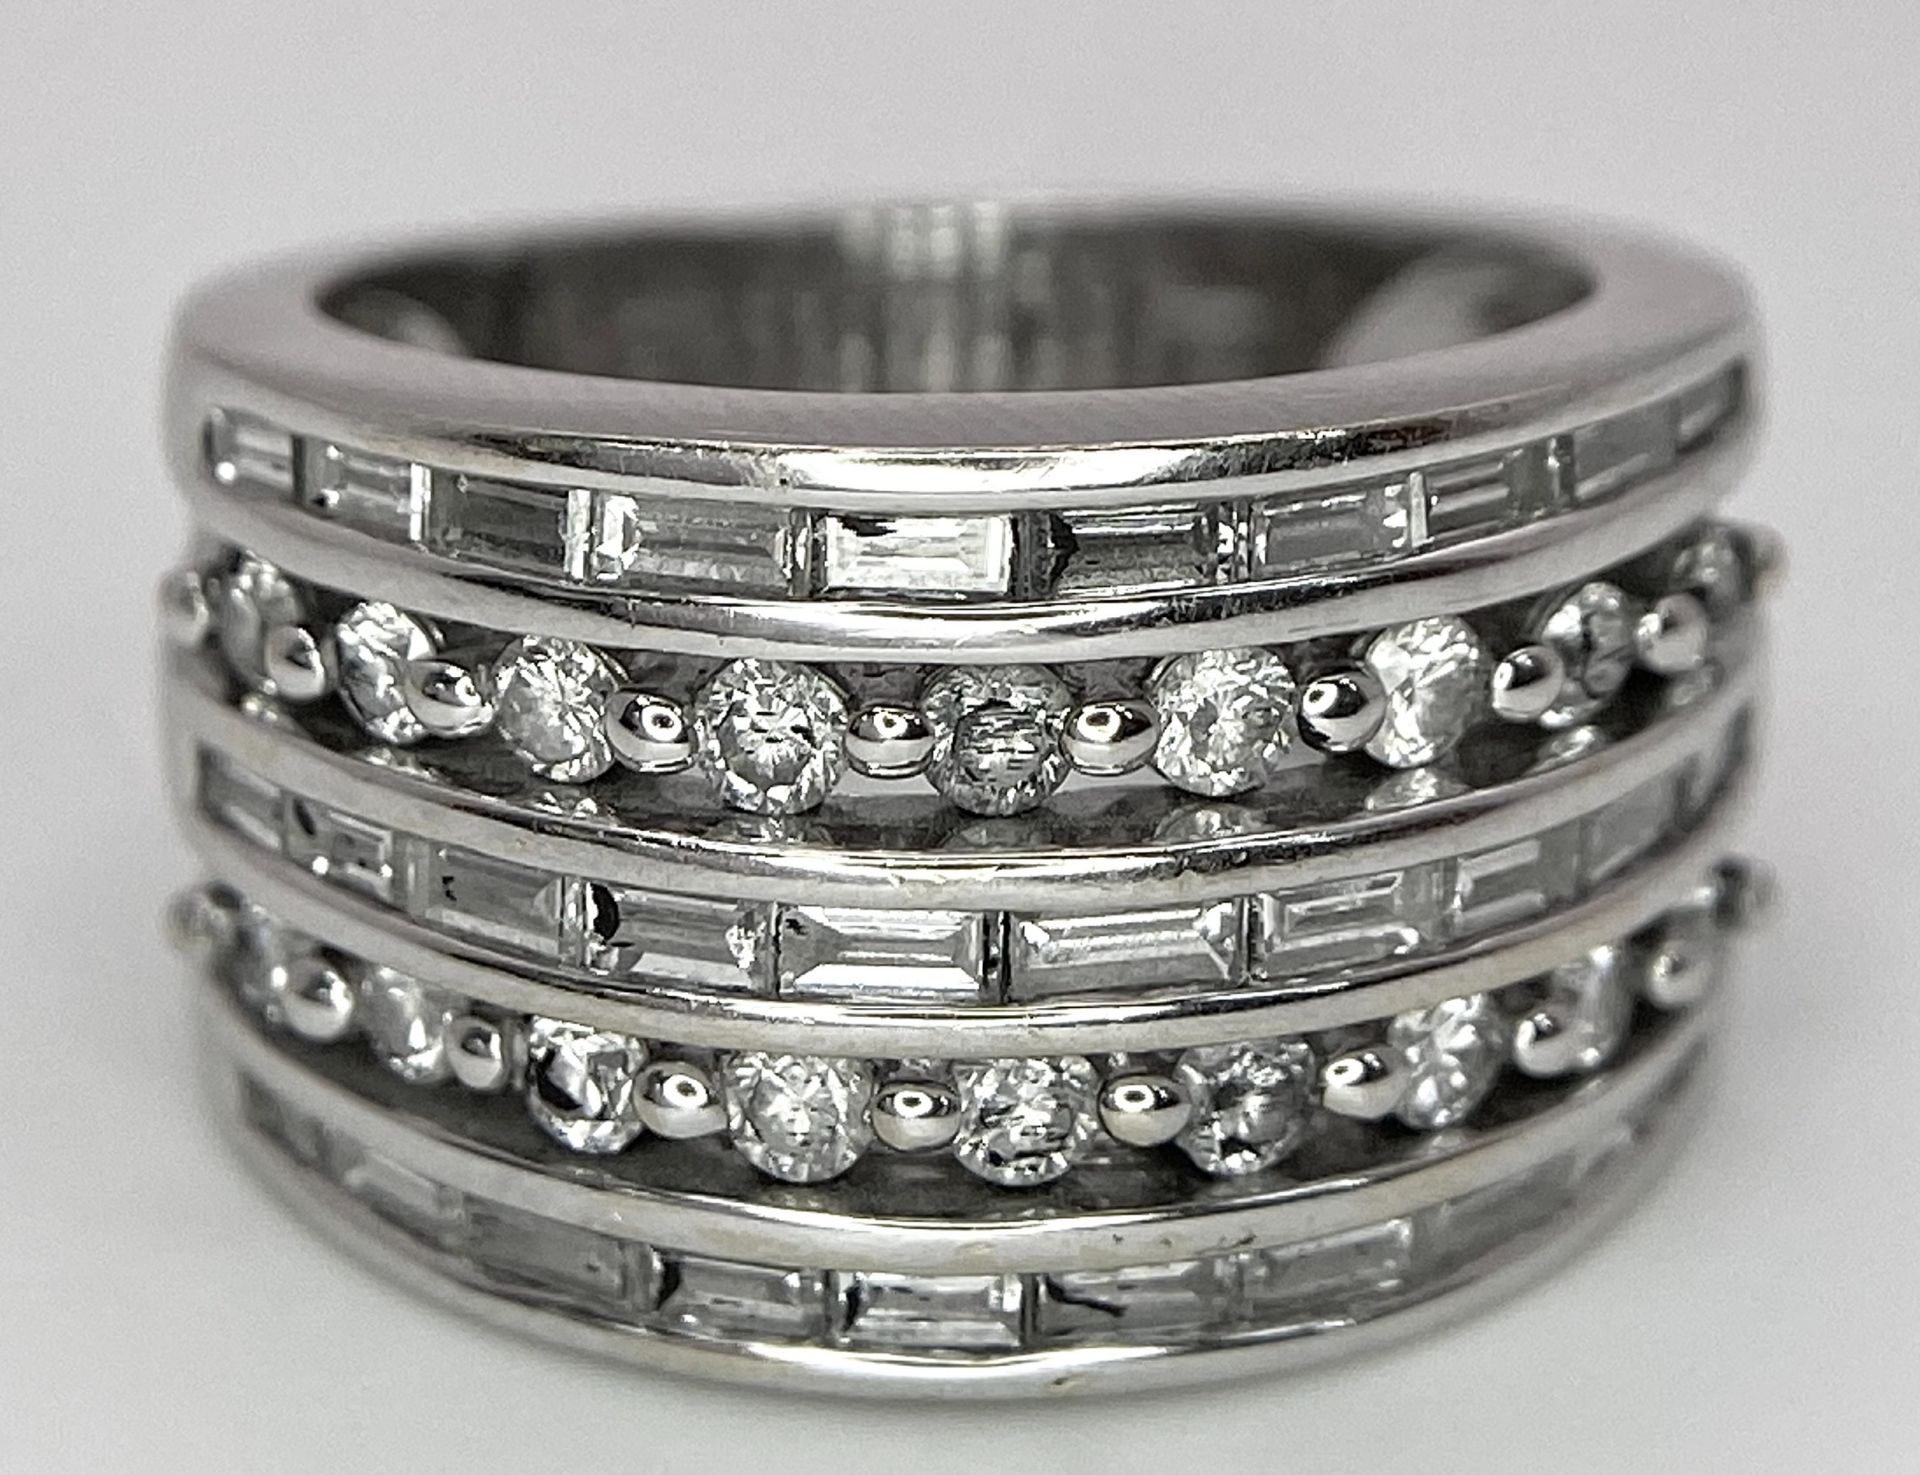 AN 18K WHITE GOLD 5 ROW DIAMOND RING. MIXTURE OF ROUND BRILLIANT CUTS AND BAGUETTE CUT DIAMONDS. - Image 7 of 9